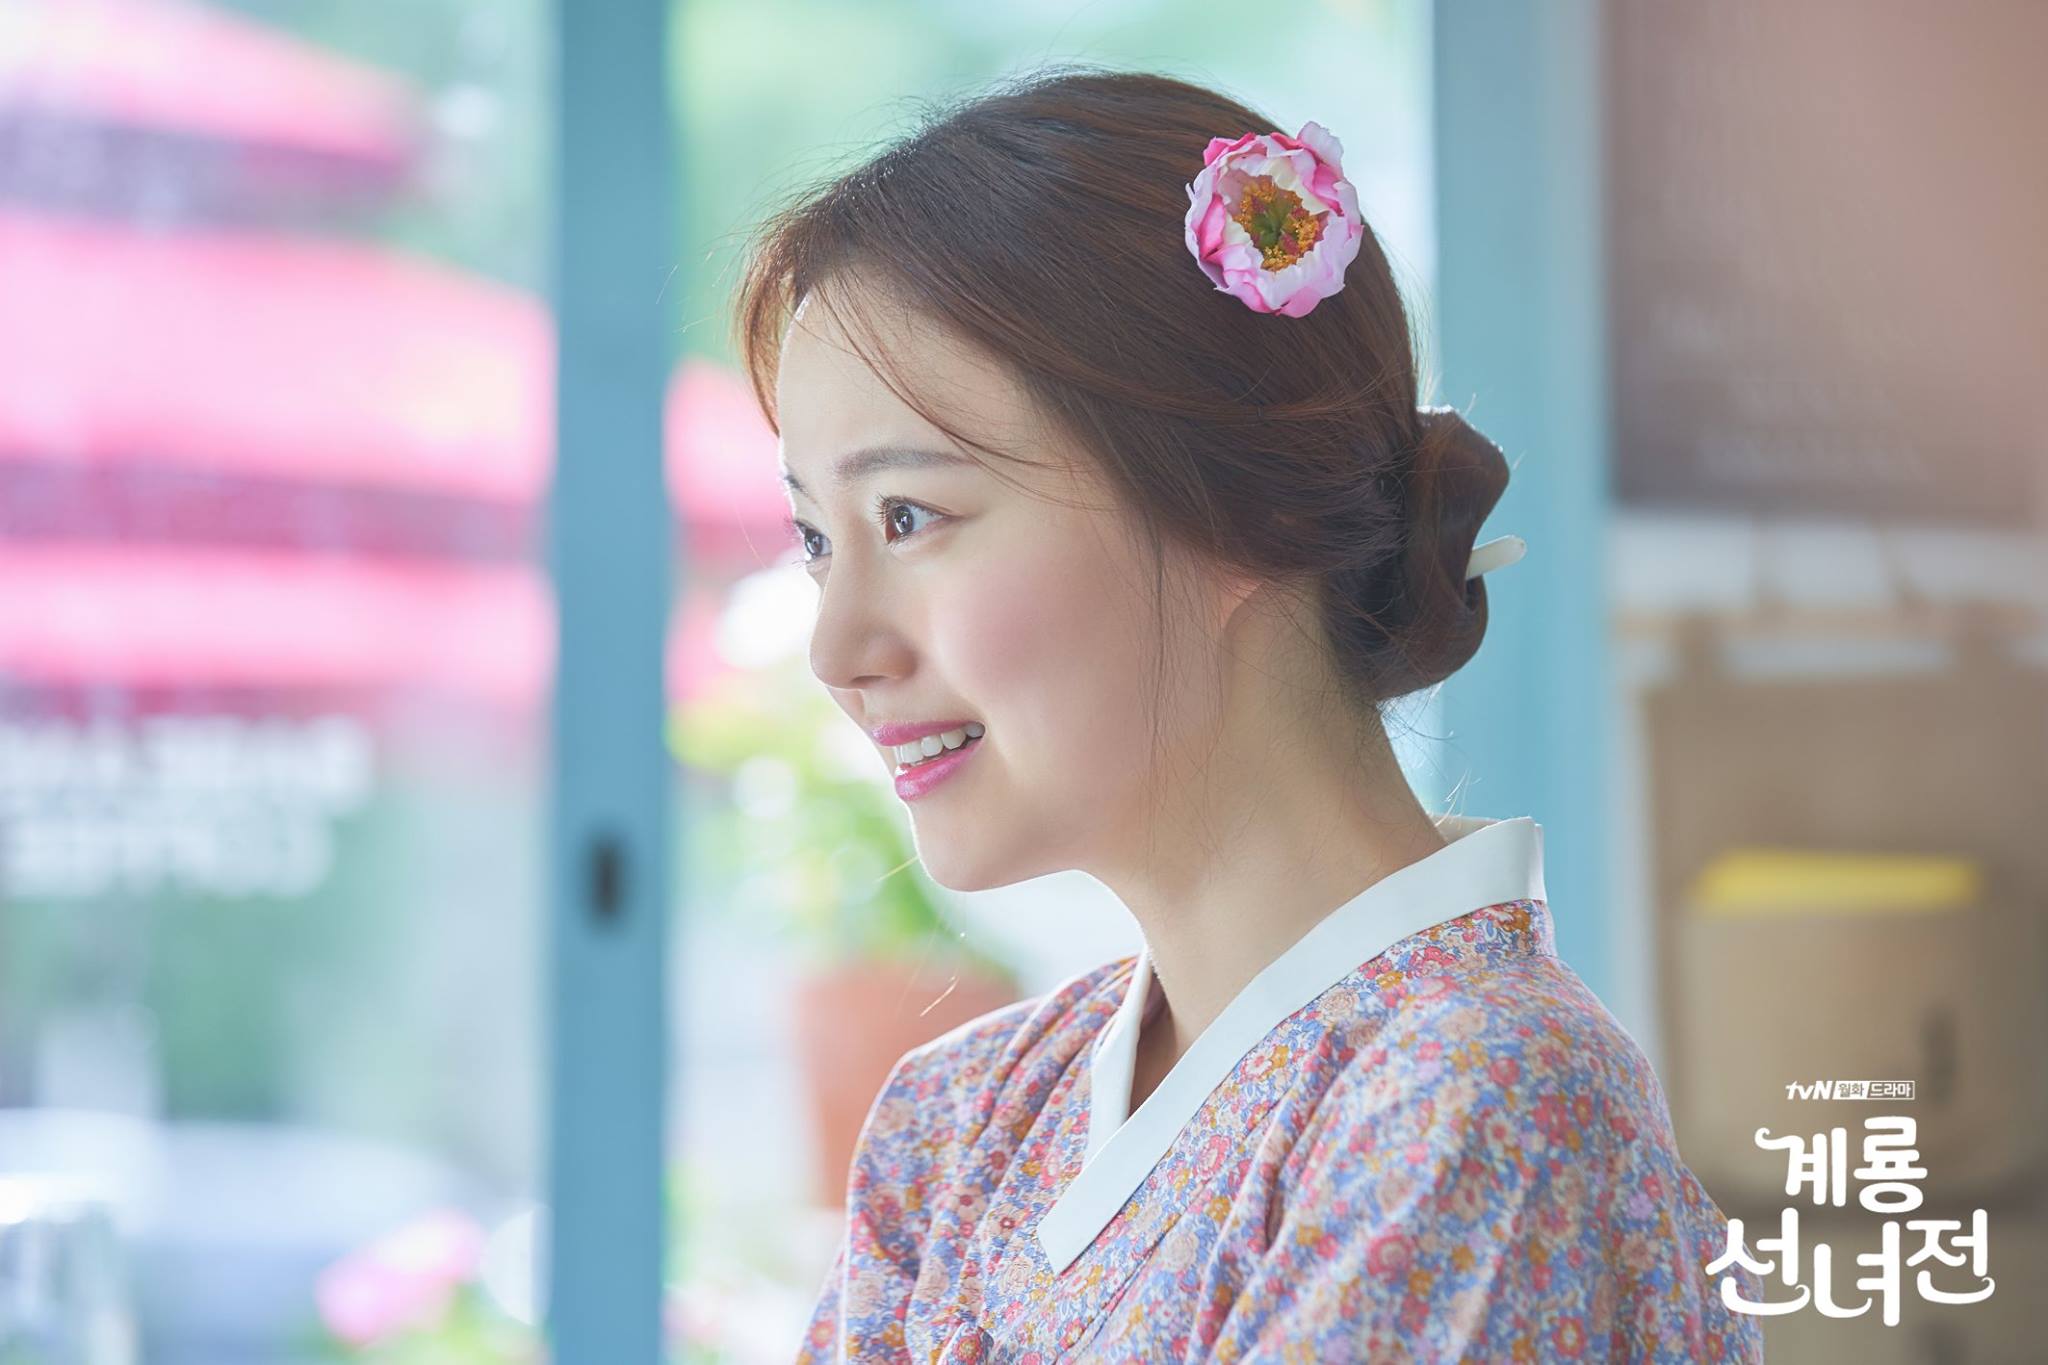 Did Moon Chae Won Undergo Plastic Surgery? Here Are The Facts And A